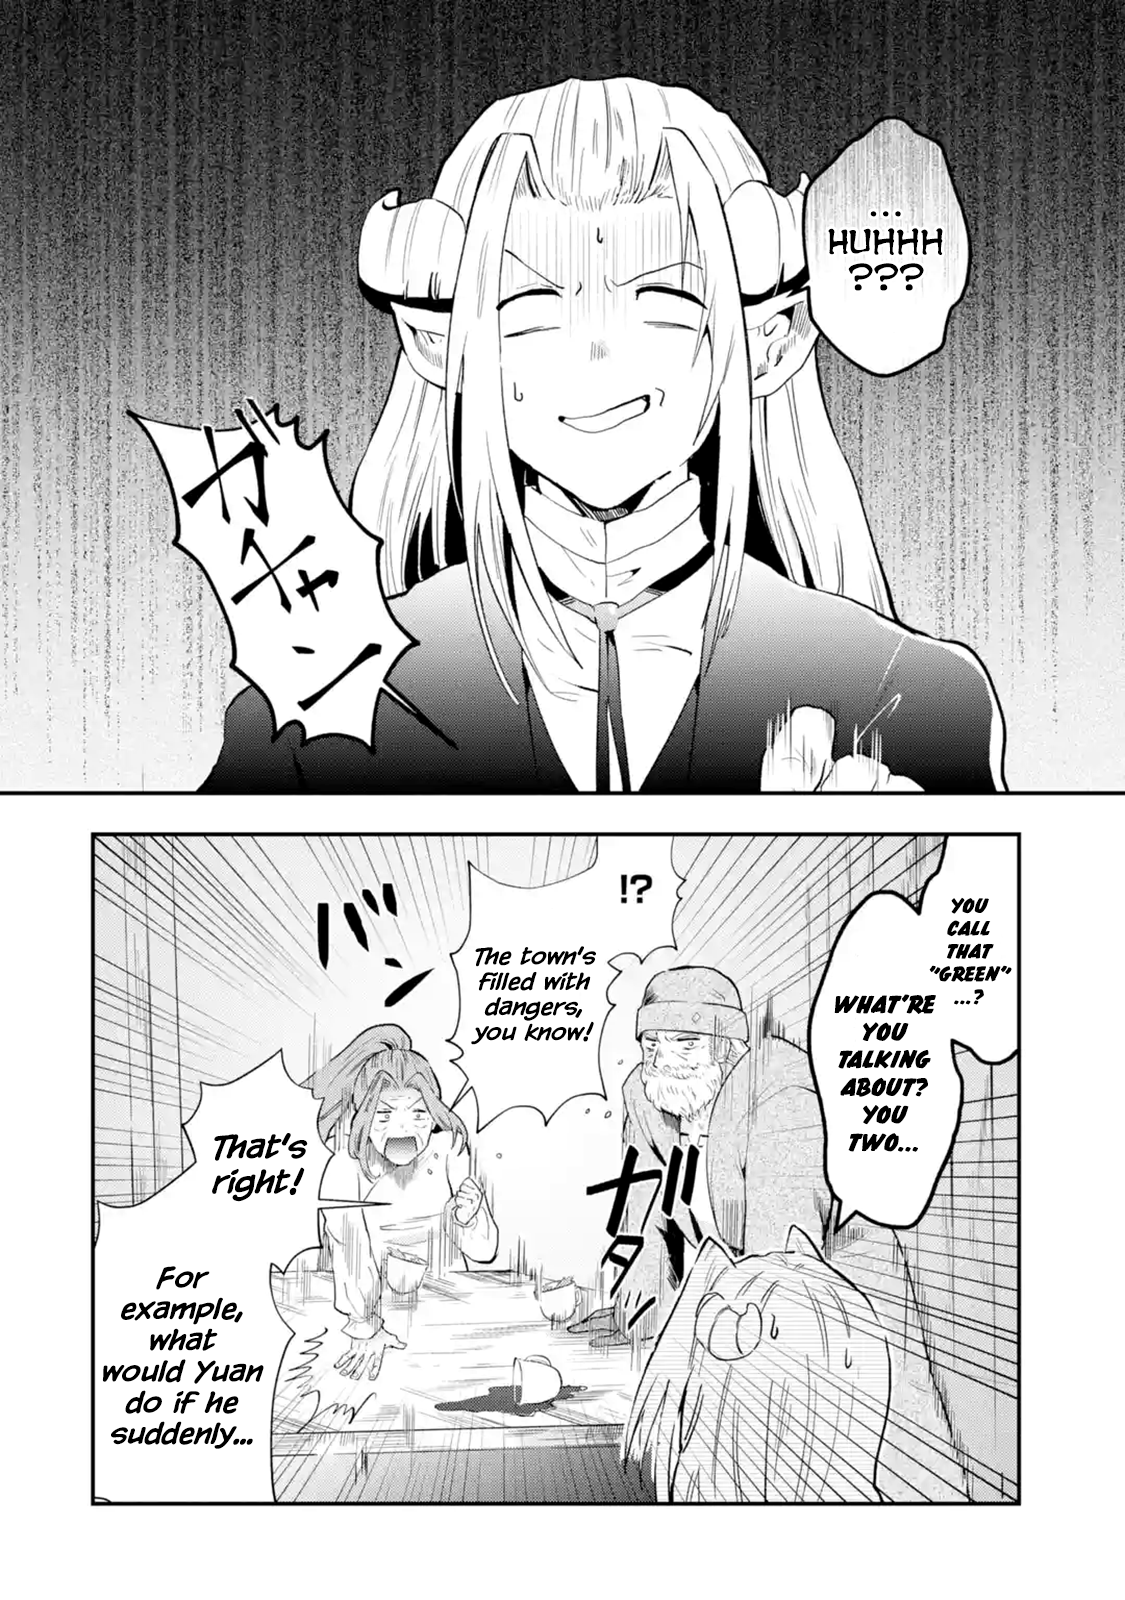 That Inferior Knight, Lv. 999 - Page 2